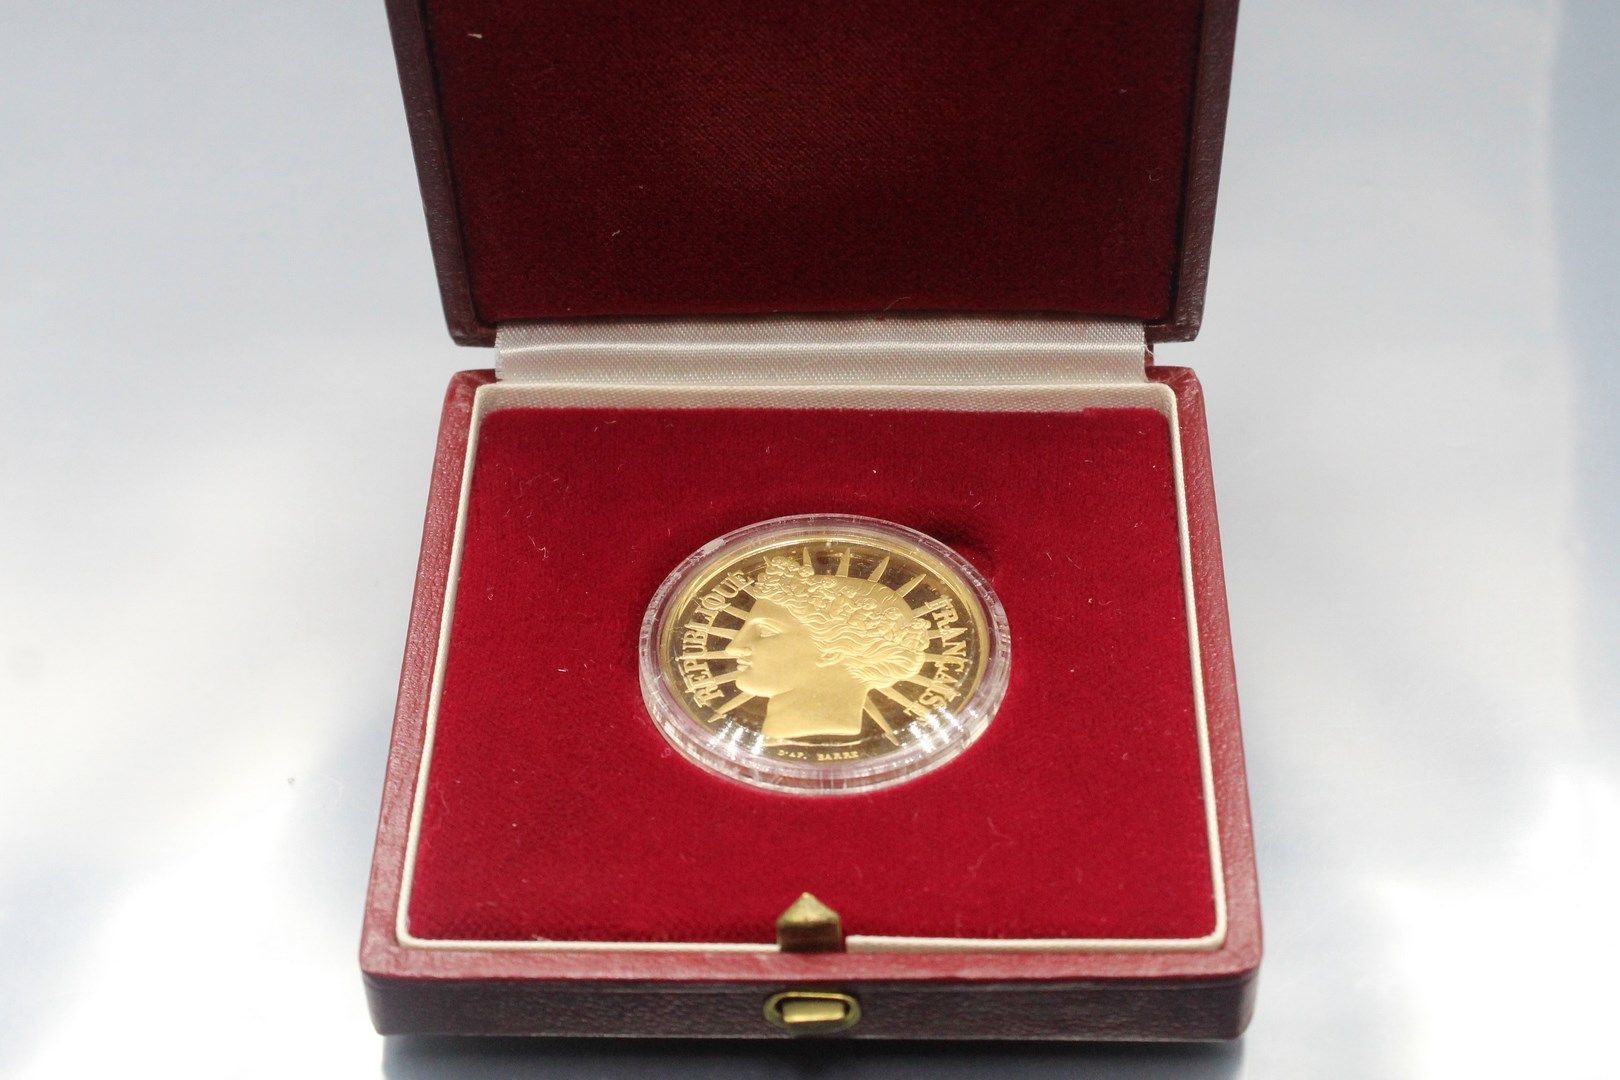 Null PARIS CURRENCY

Coin of 100 F in gold (920%) Ceres, 1988. 

Weight : 17 g

&hellip;